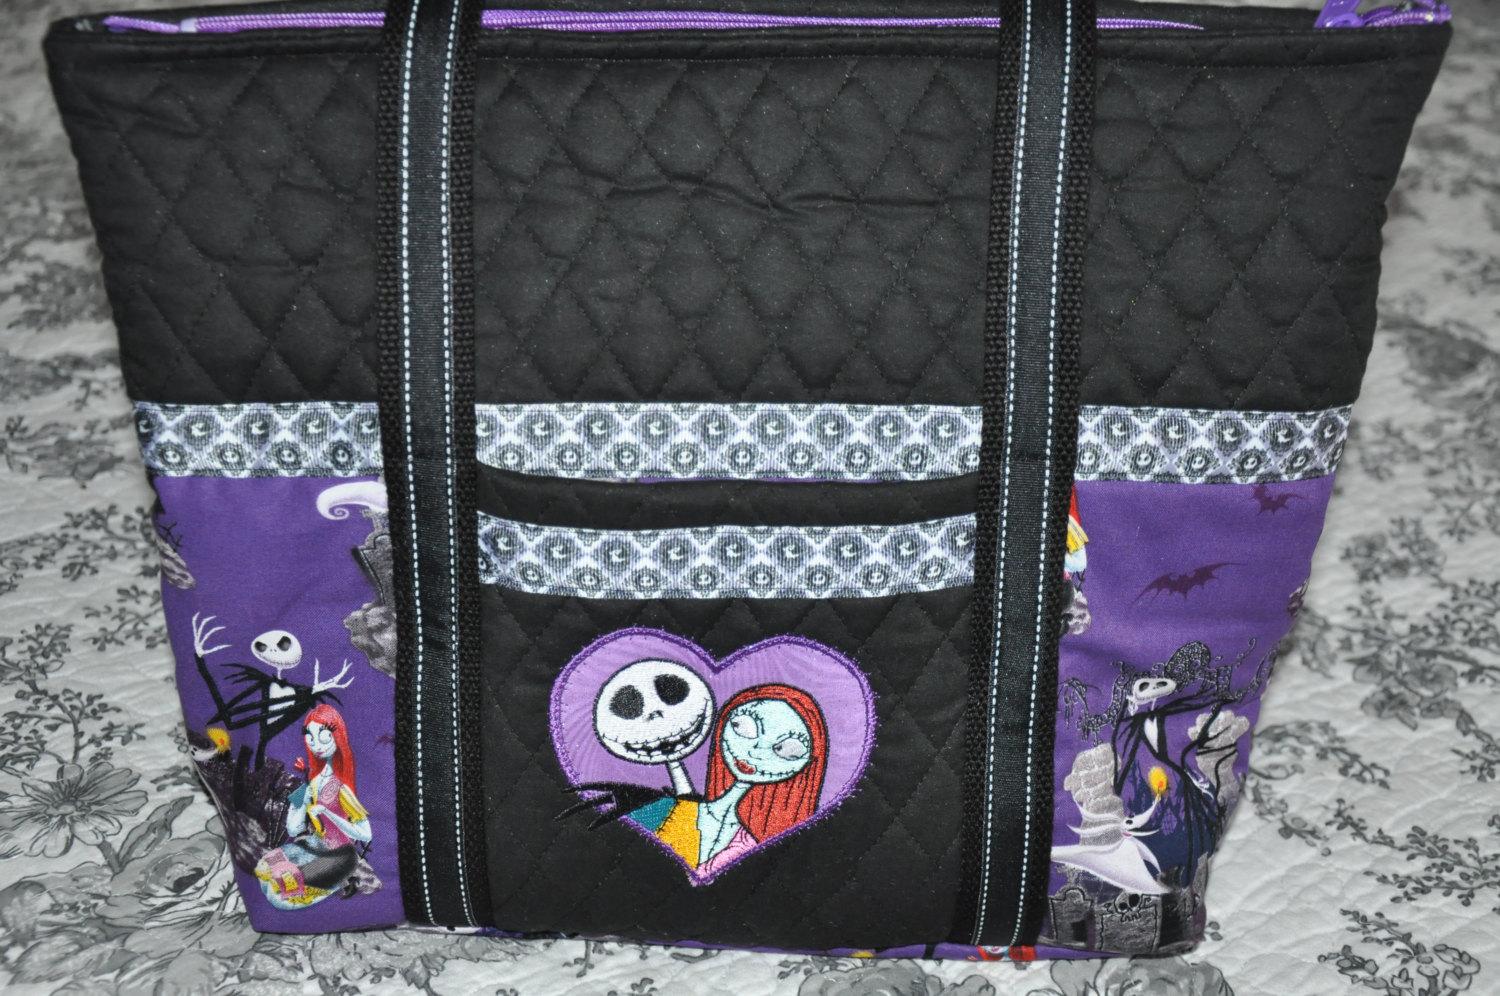 A bag with Jack and Sally from Nightmare Before Christmas 2 design